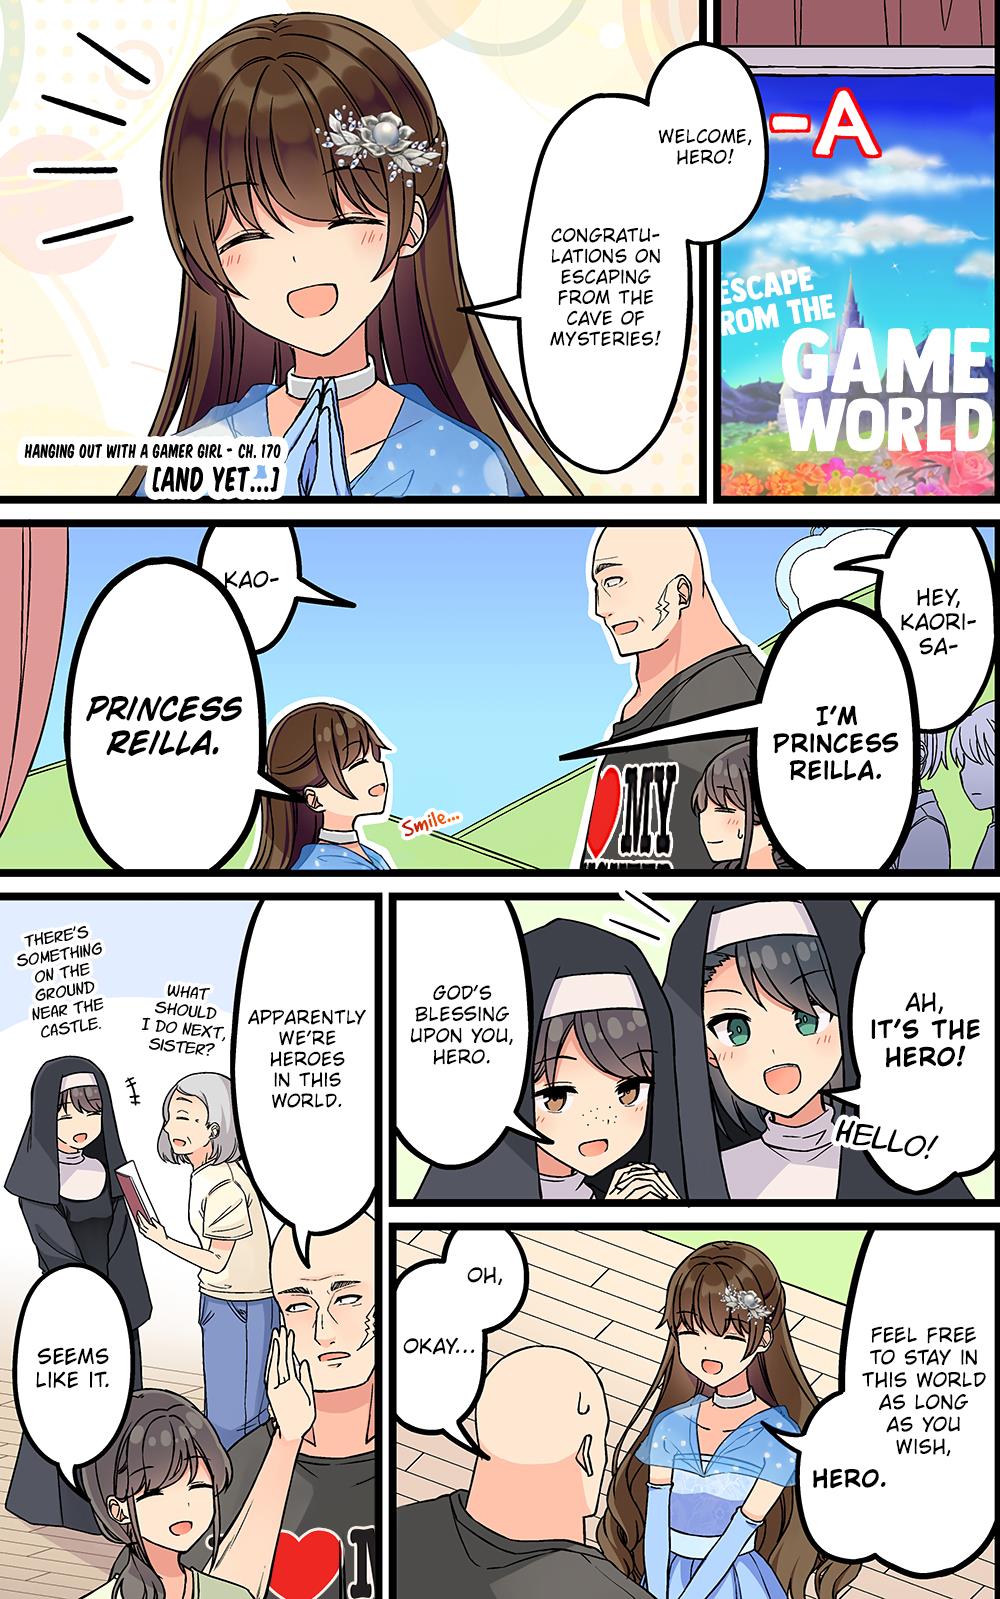 Hanging Out With A Gamer Girl - Page 1